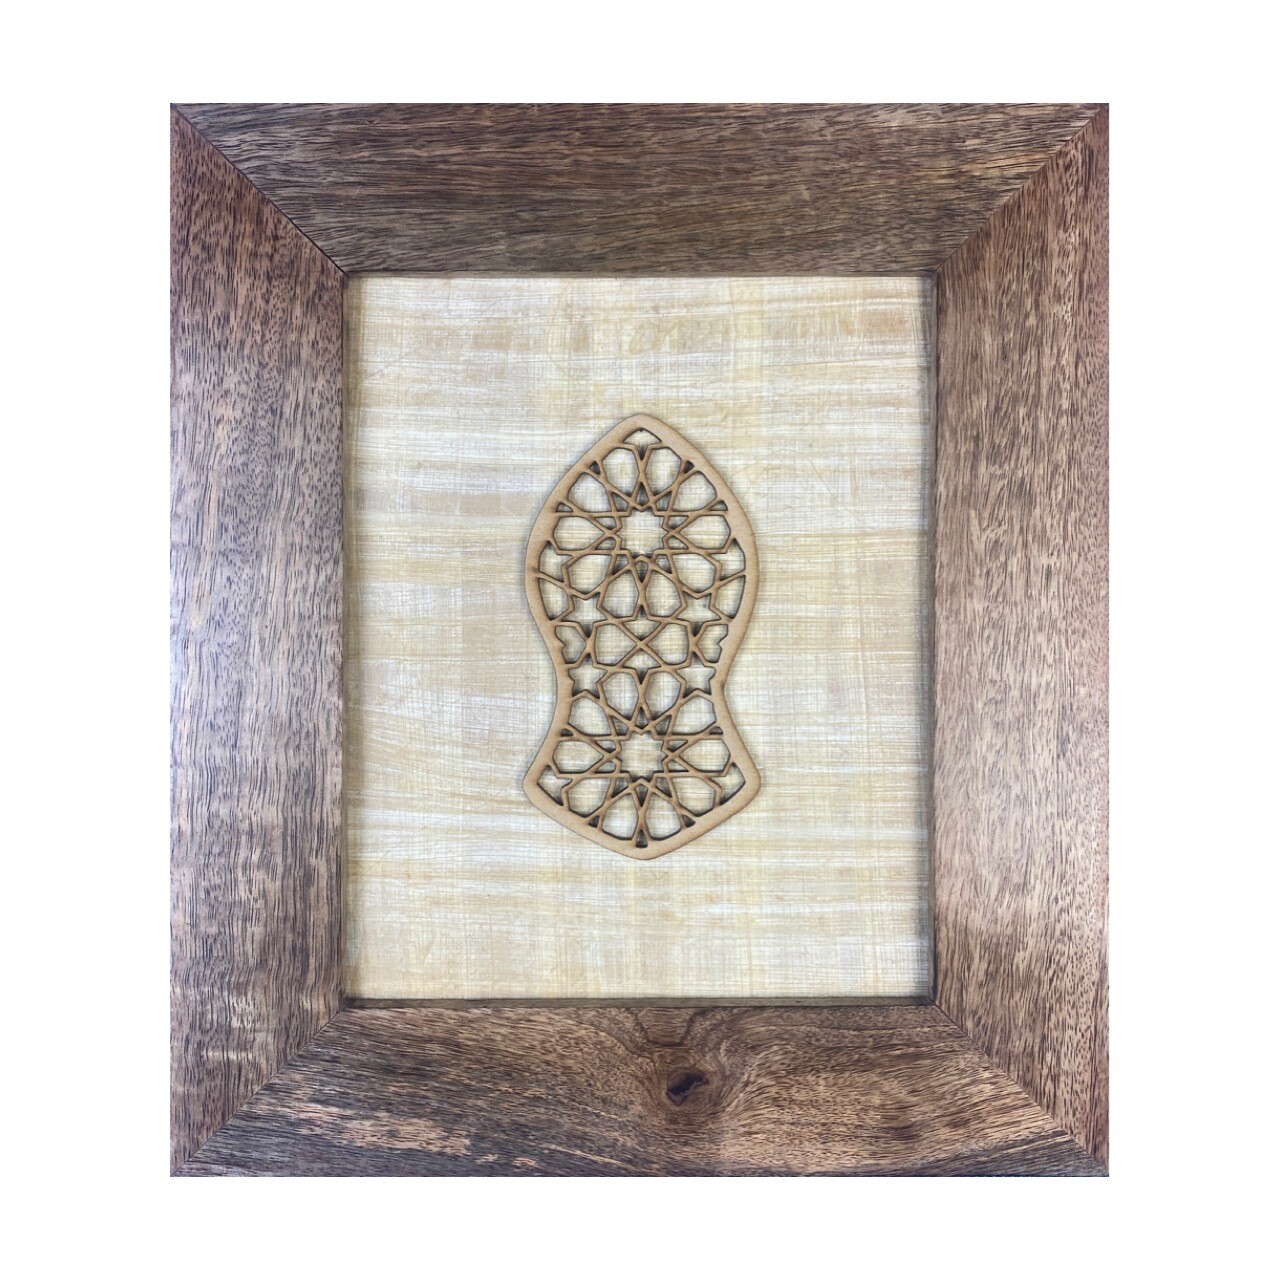 Blessed Sandal Laser Cut On Papyrus in Mango Wood Frame